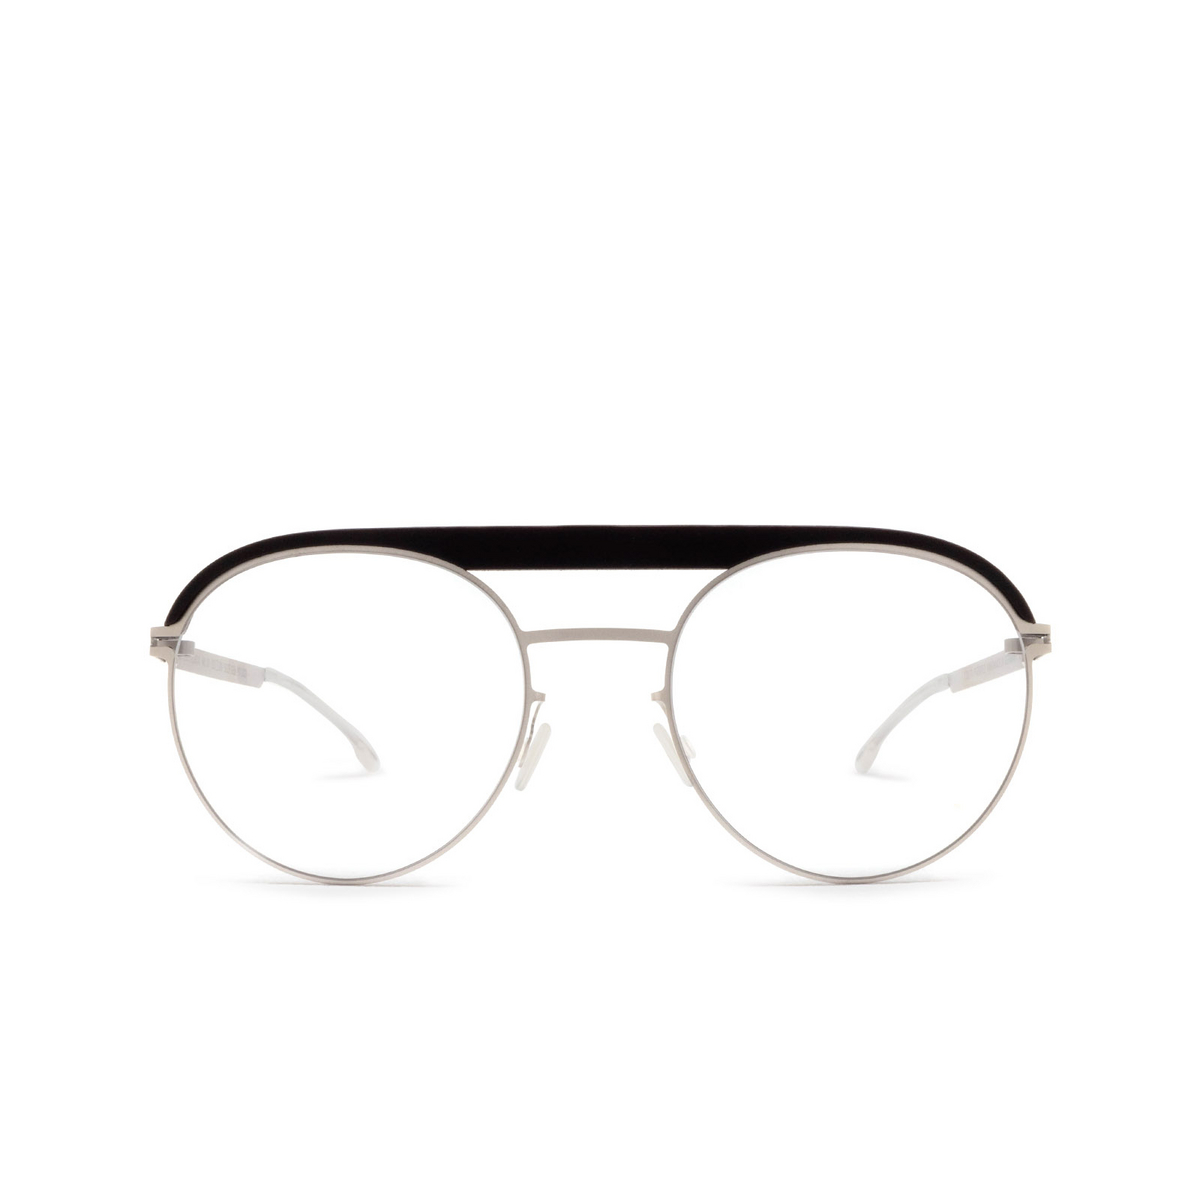 Mykita® Round Eyeglasses: ML01 color 471 Mh49 Pitch Black/matte Silver - front view